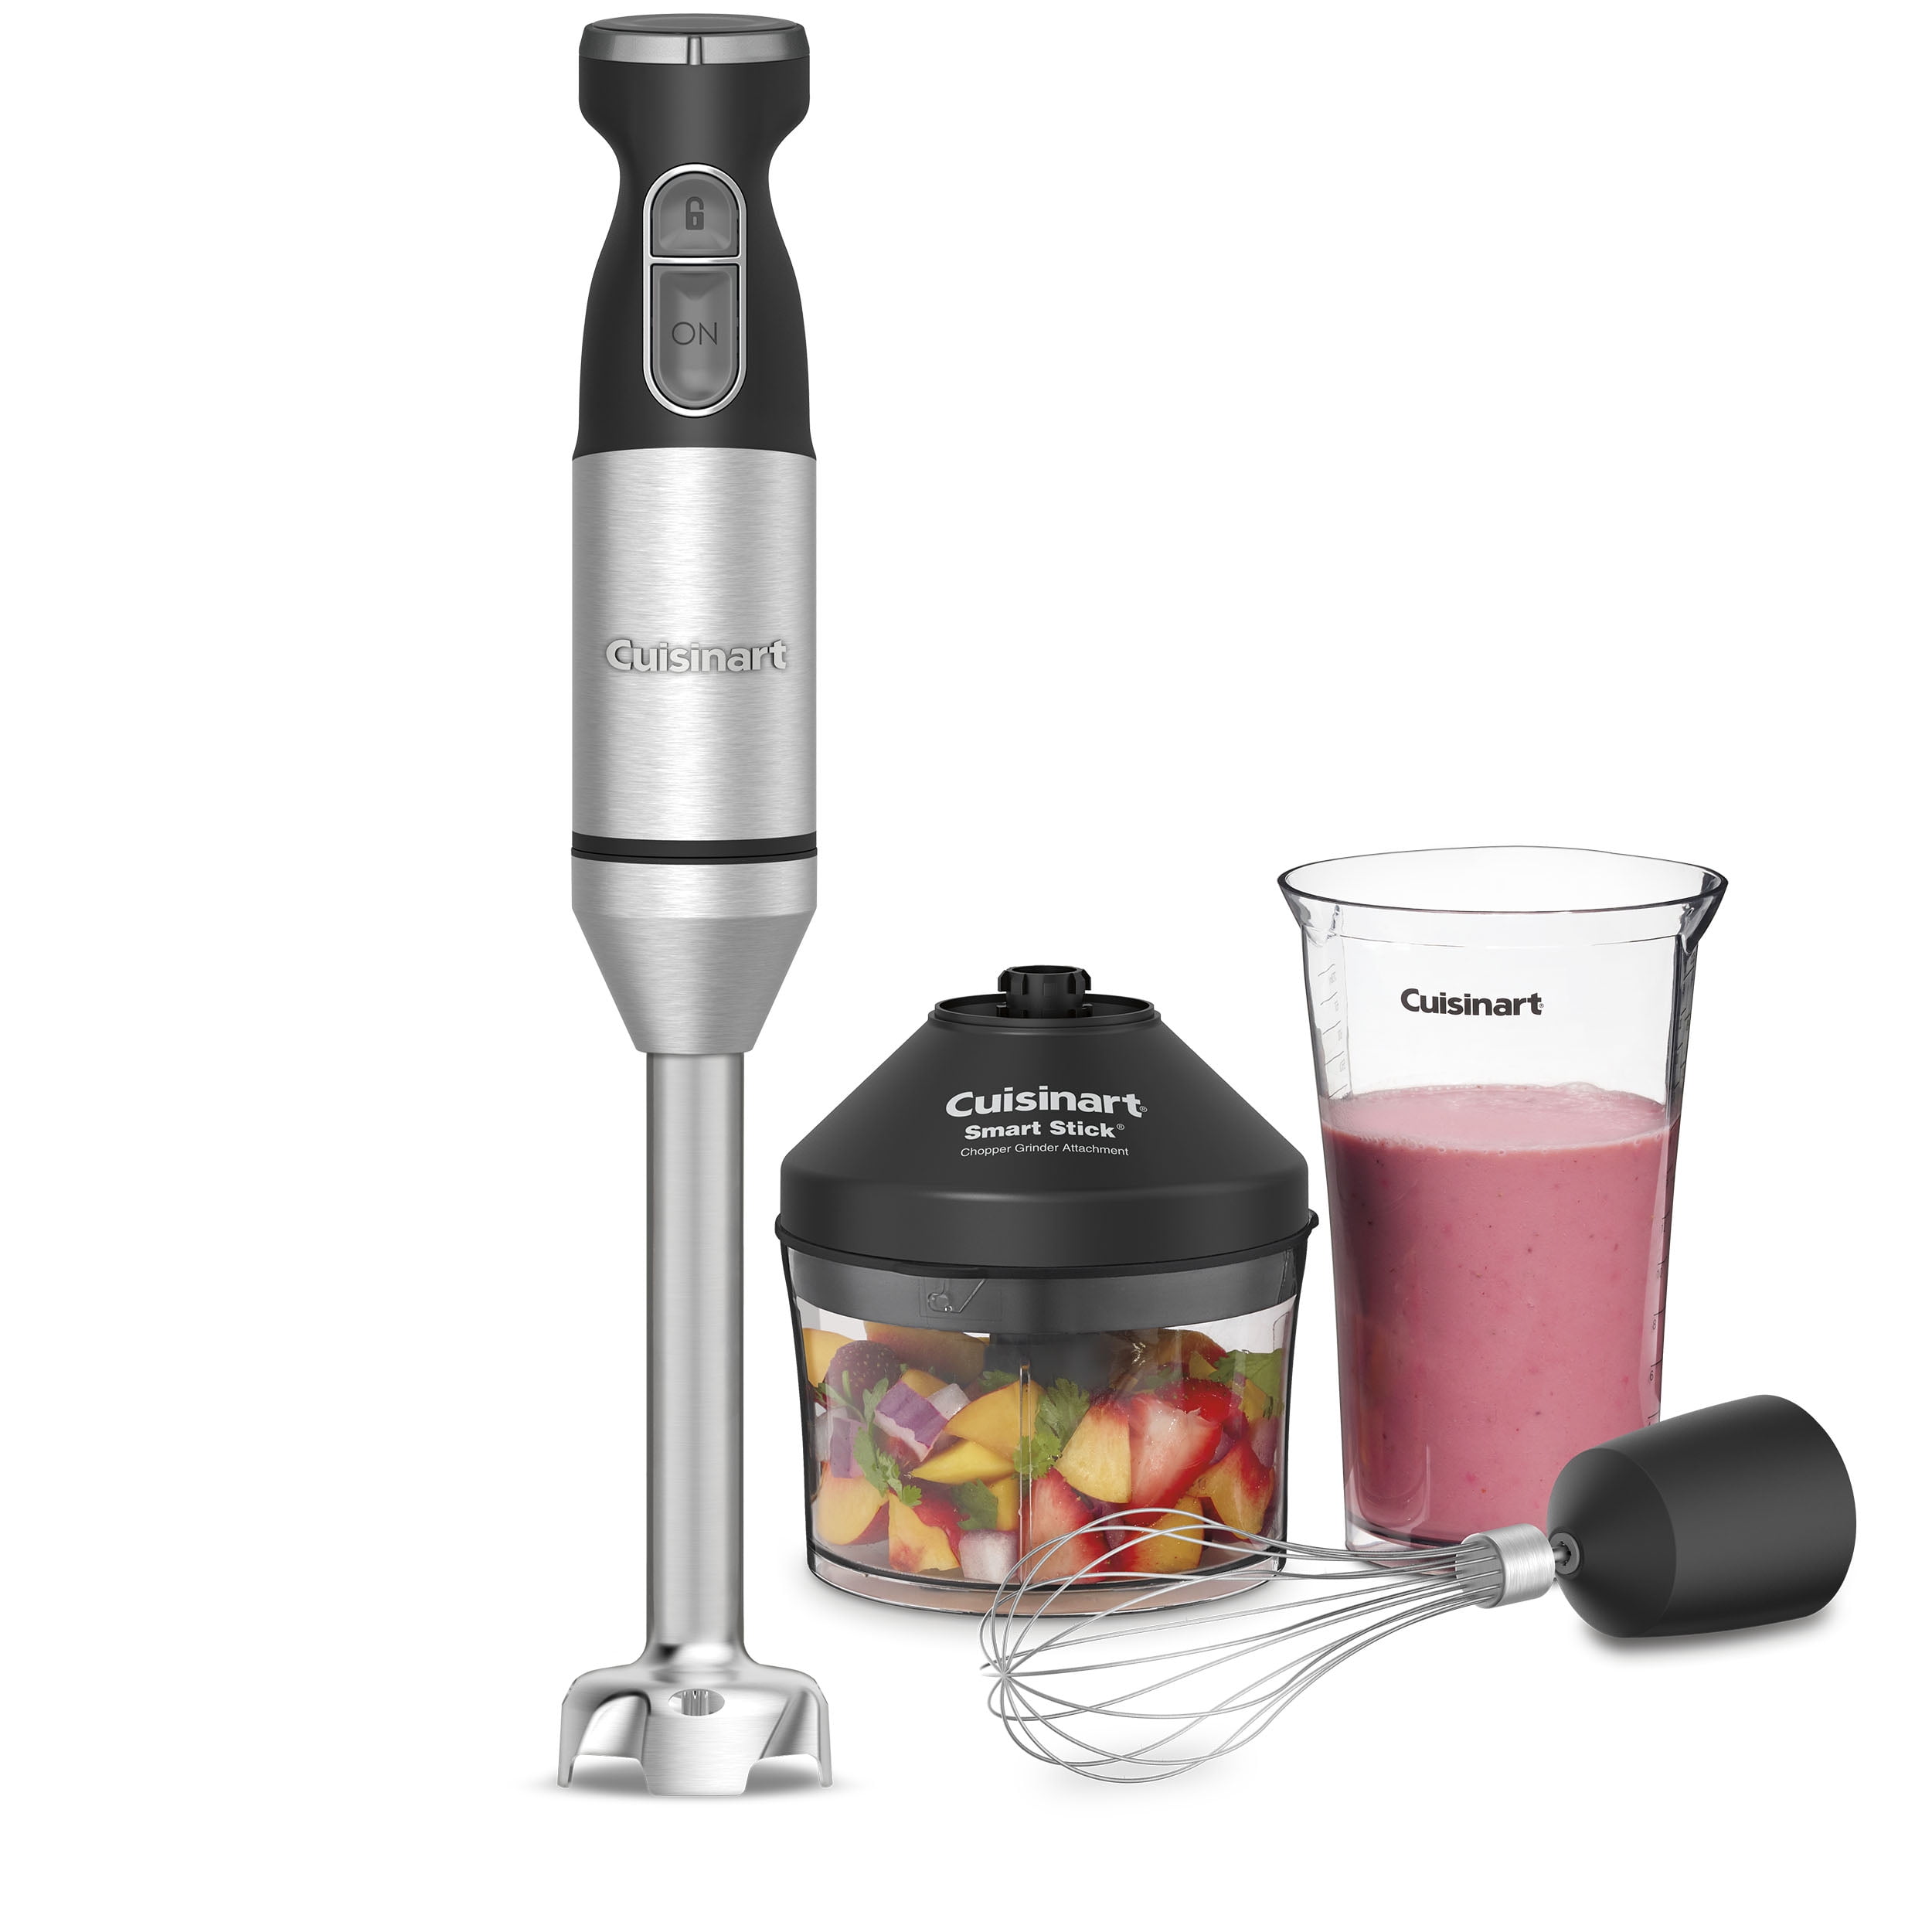 Cuisinart SmartStick 2-Speed White Immersion Blender with 3-Cup Mixing Bowl  CSB-175 - The Home Depot